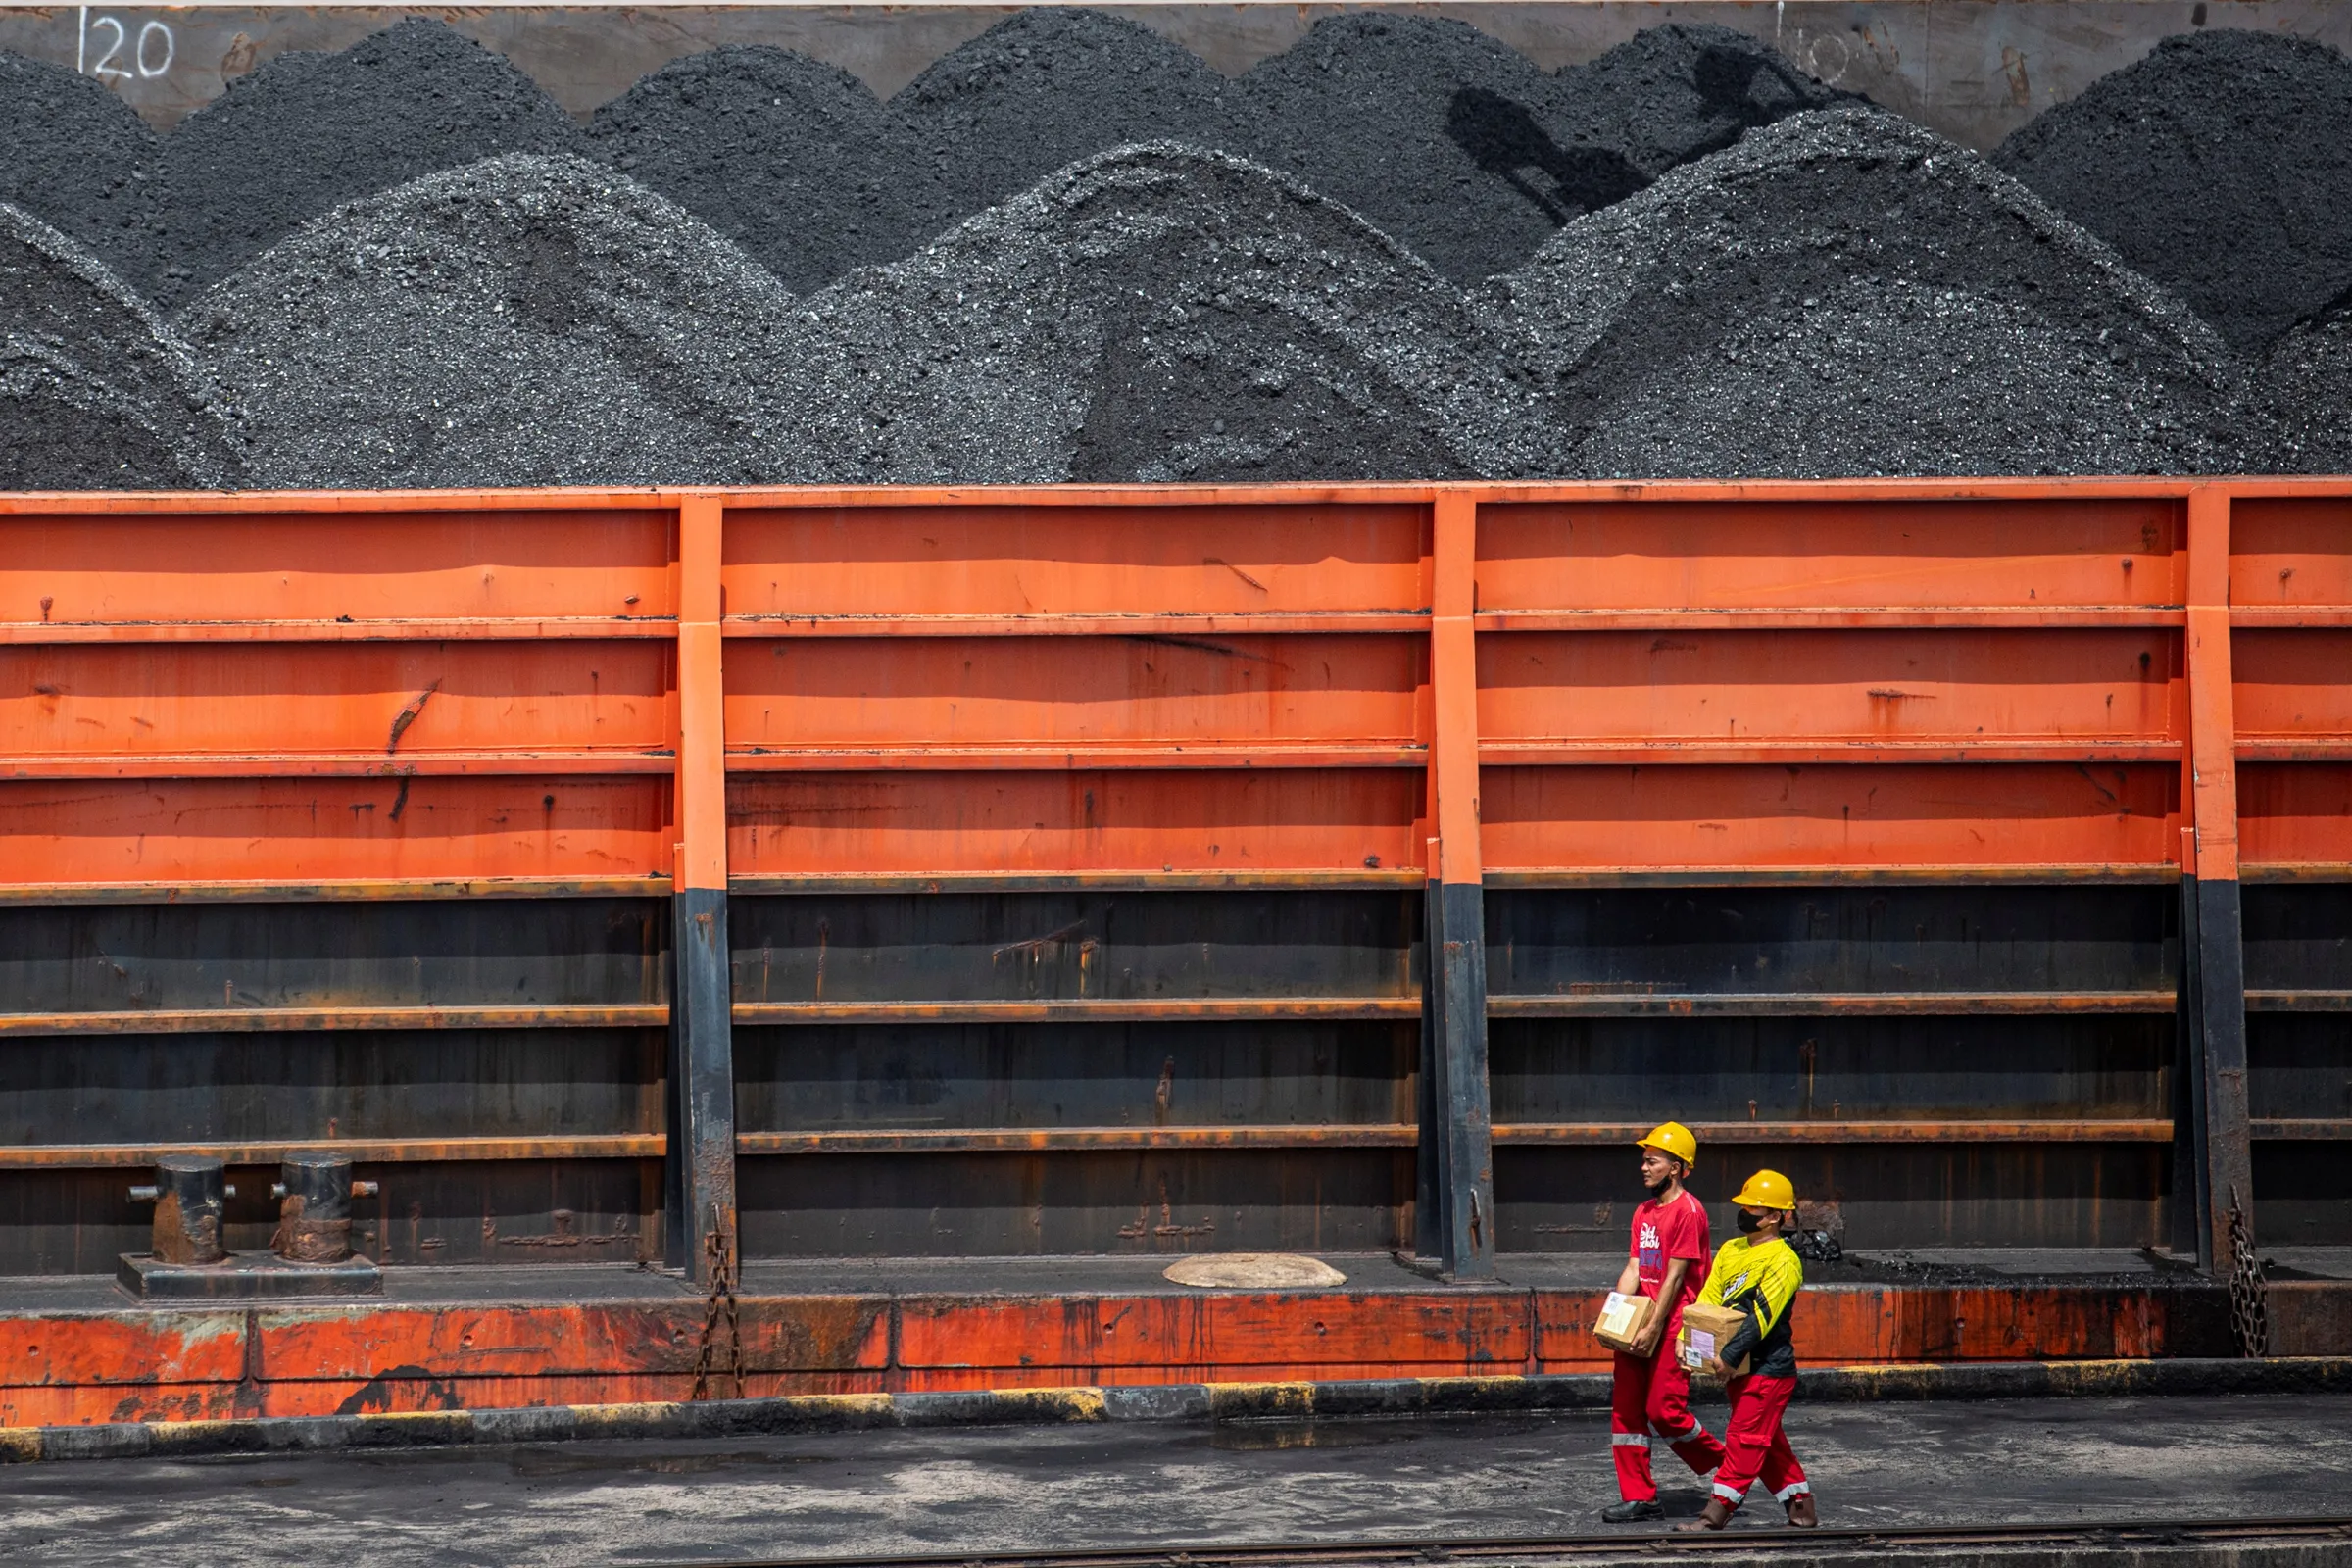 Can Indonesia ditch coal and improve lives with new green deal?